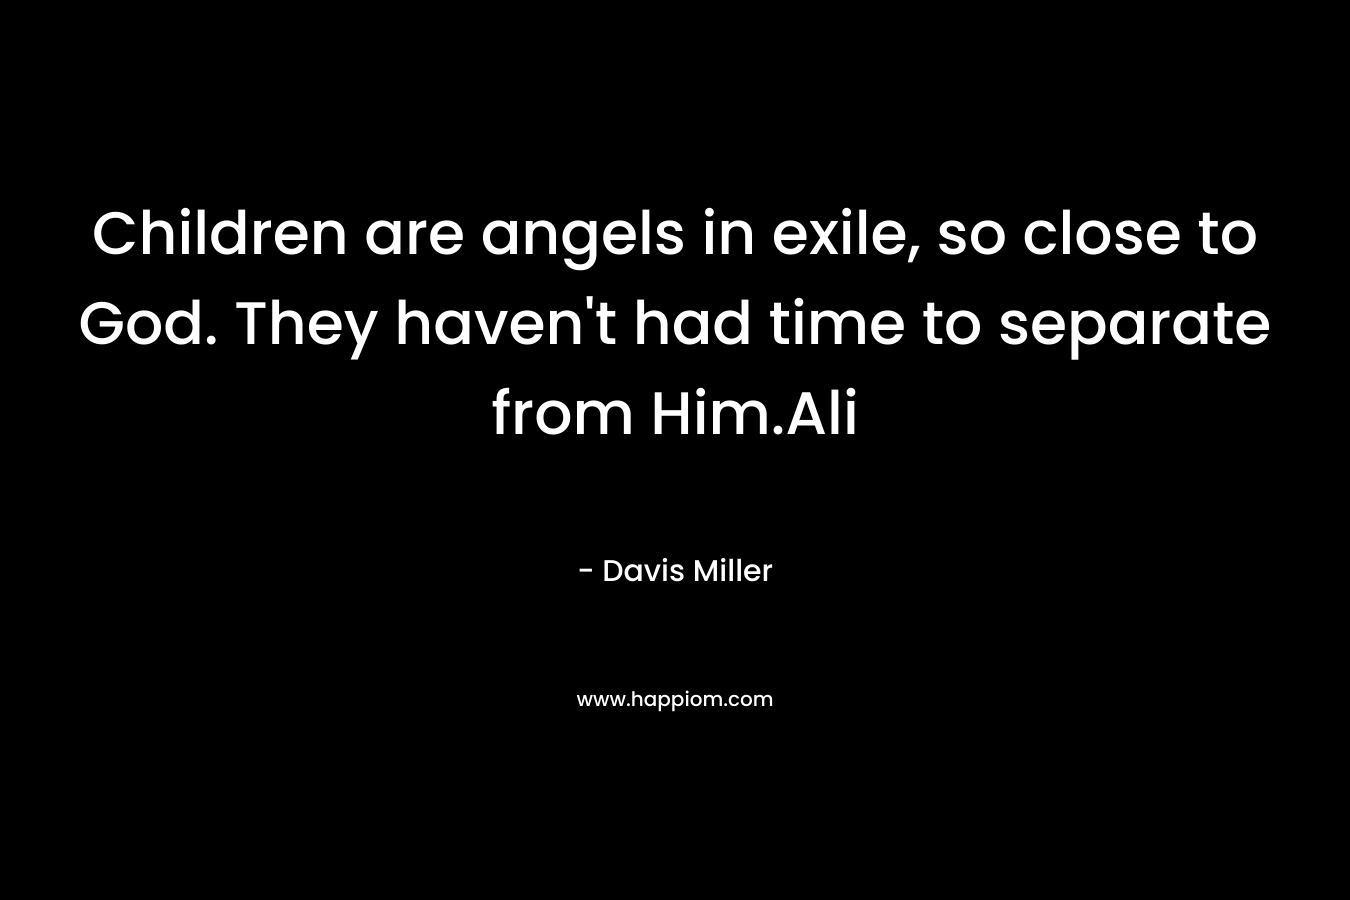 Children are angels in exile, so close to God. They haven’t had time to separate from Him.Ali – Davis Miller